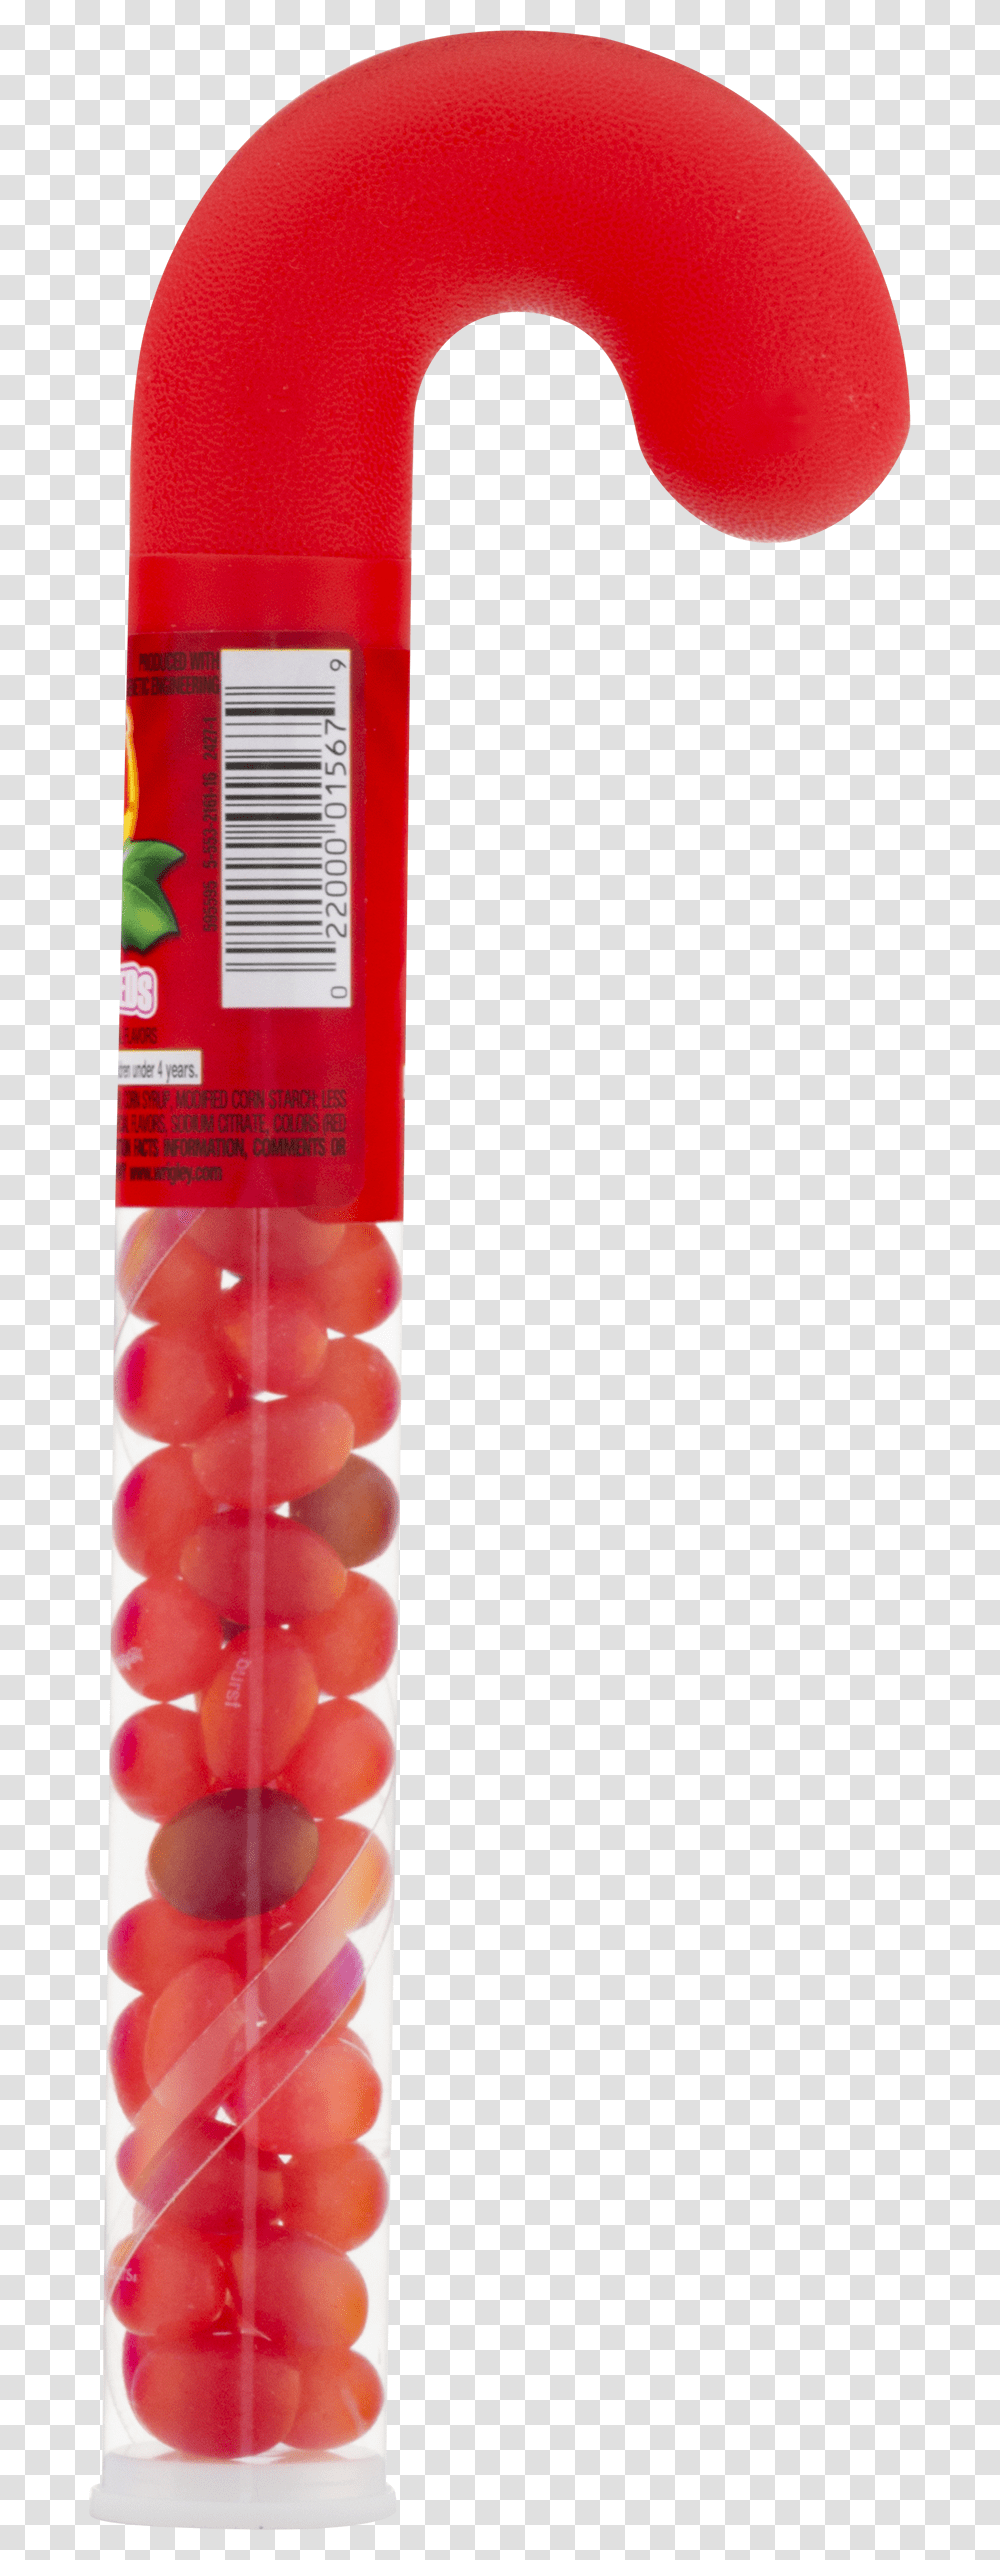 Starburst Holiday Jelly Bean Christmas Candy Cane Oz, Aluminium, Plant, Spray Can, Tin Transparent Png